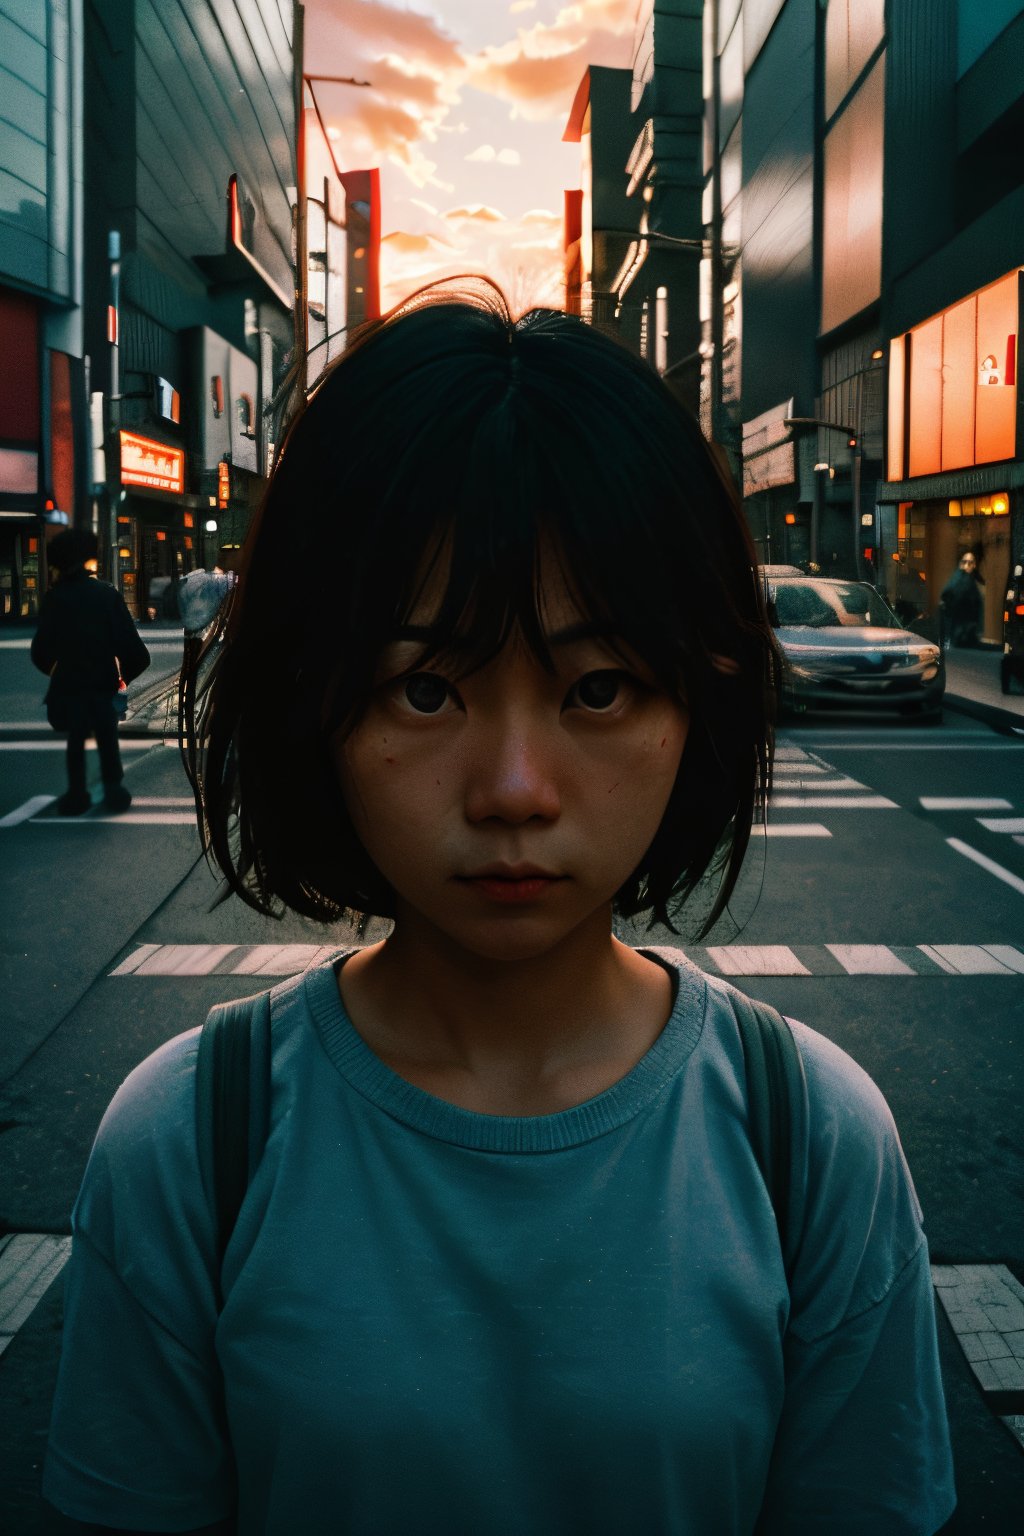 realistic,portrait,film grain,sunset,shadow,asian,woman,sunlight,day,epic,fantastic,street,messy hair,light,grainy,real photo,outdoor,grainy,lightshapes,cloudy color,japan,